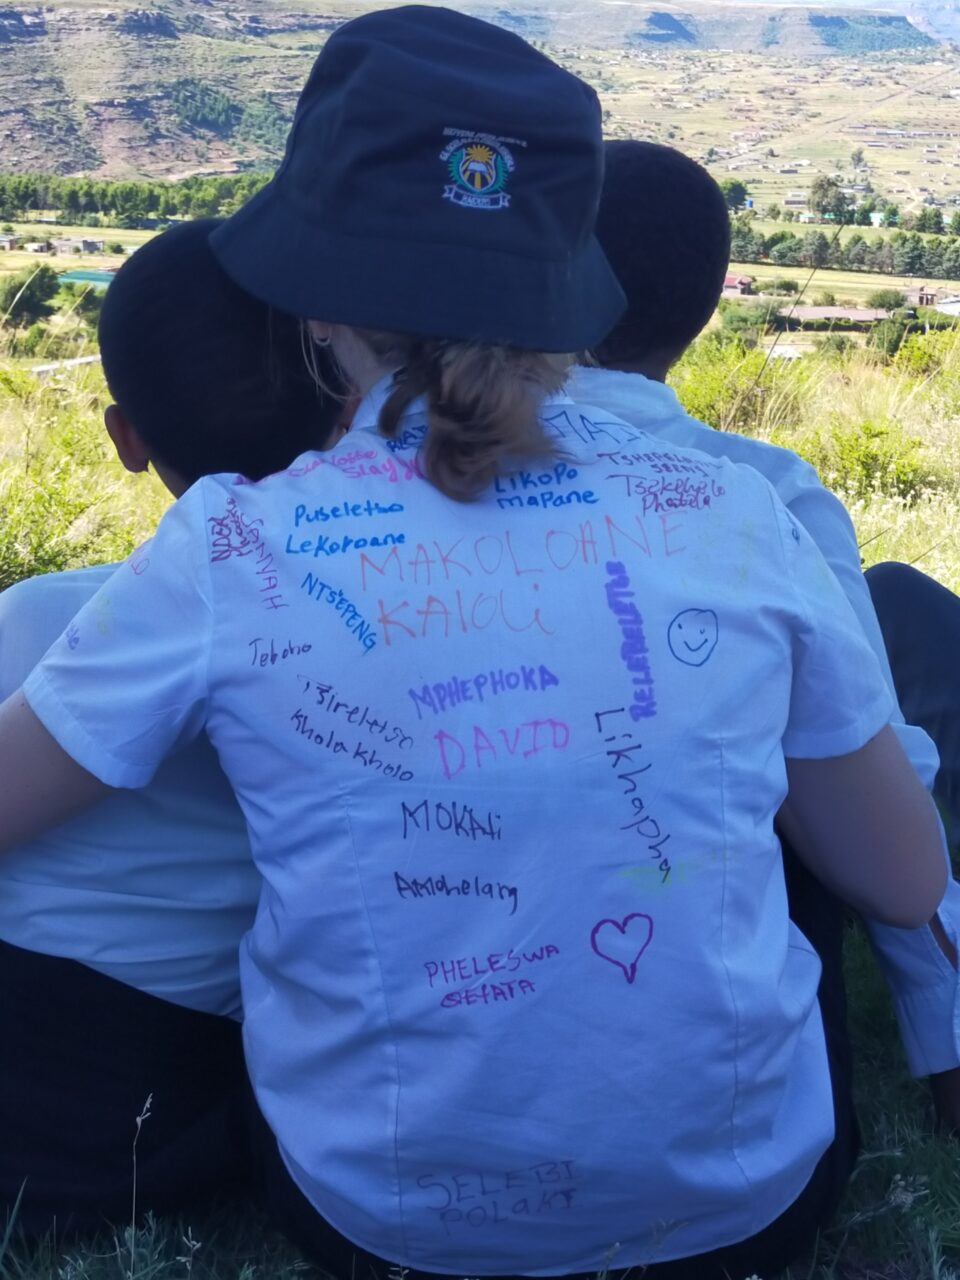 A back shot of 3 people. One is wearing a signed shirt and is wearing a bucket hat.